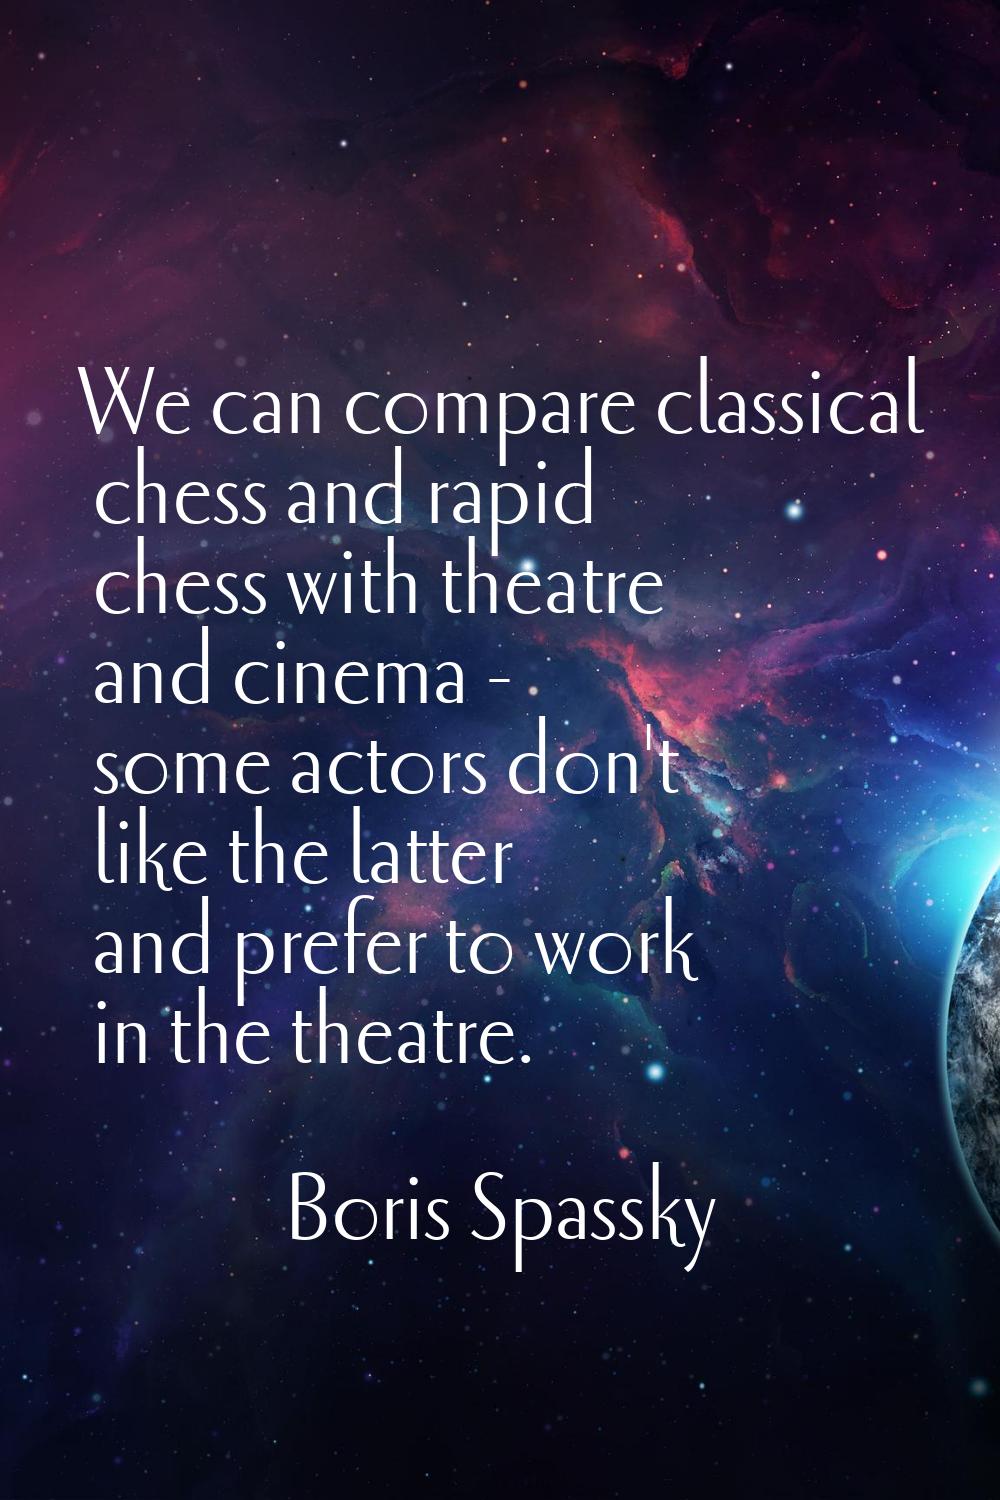 We can compare classical chess and rapid chess with theatre and cinema - some actors don't like the